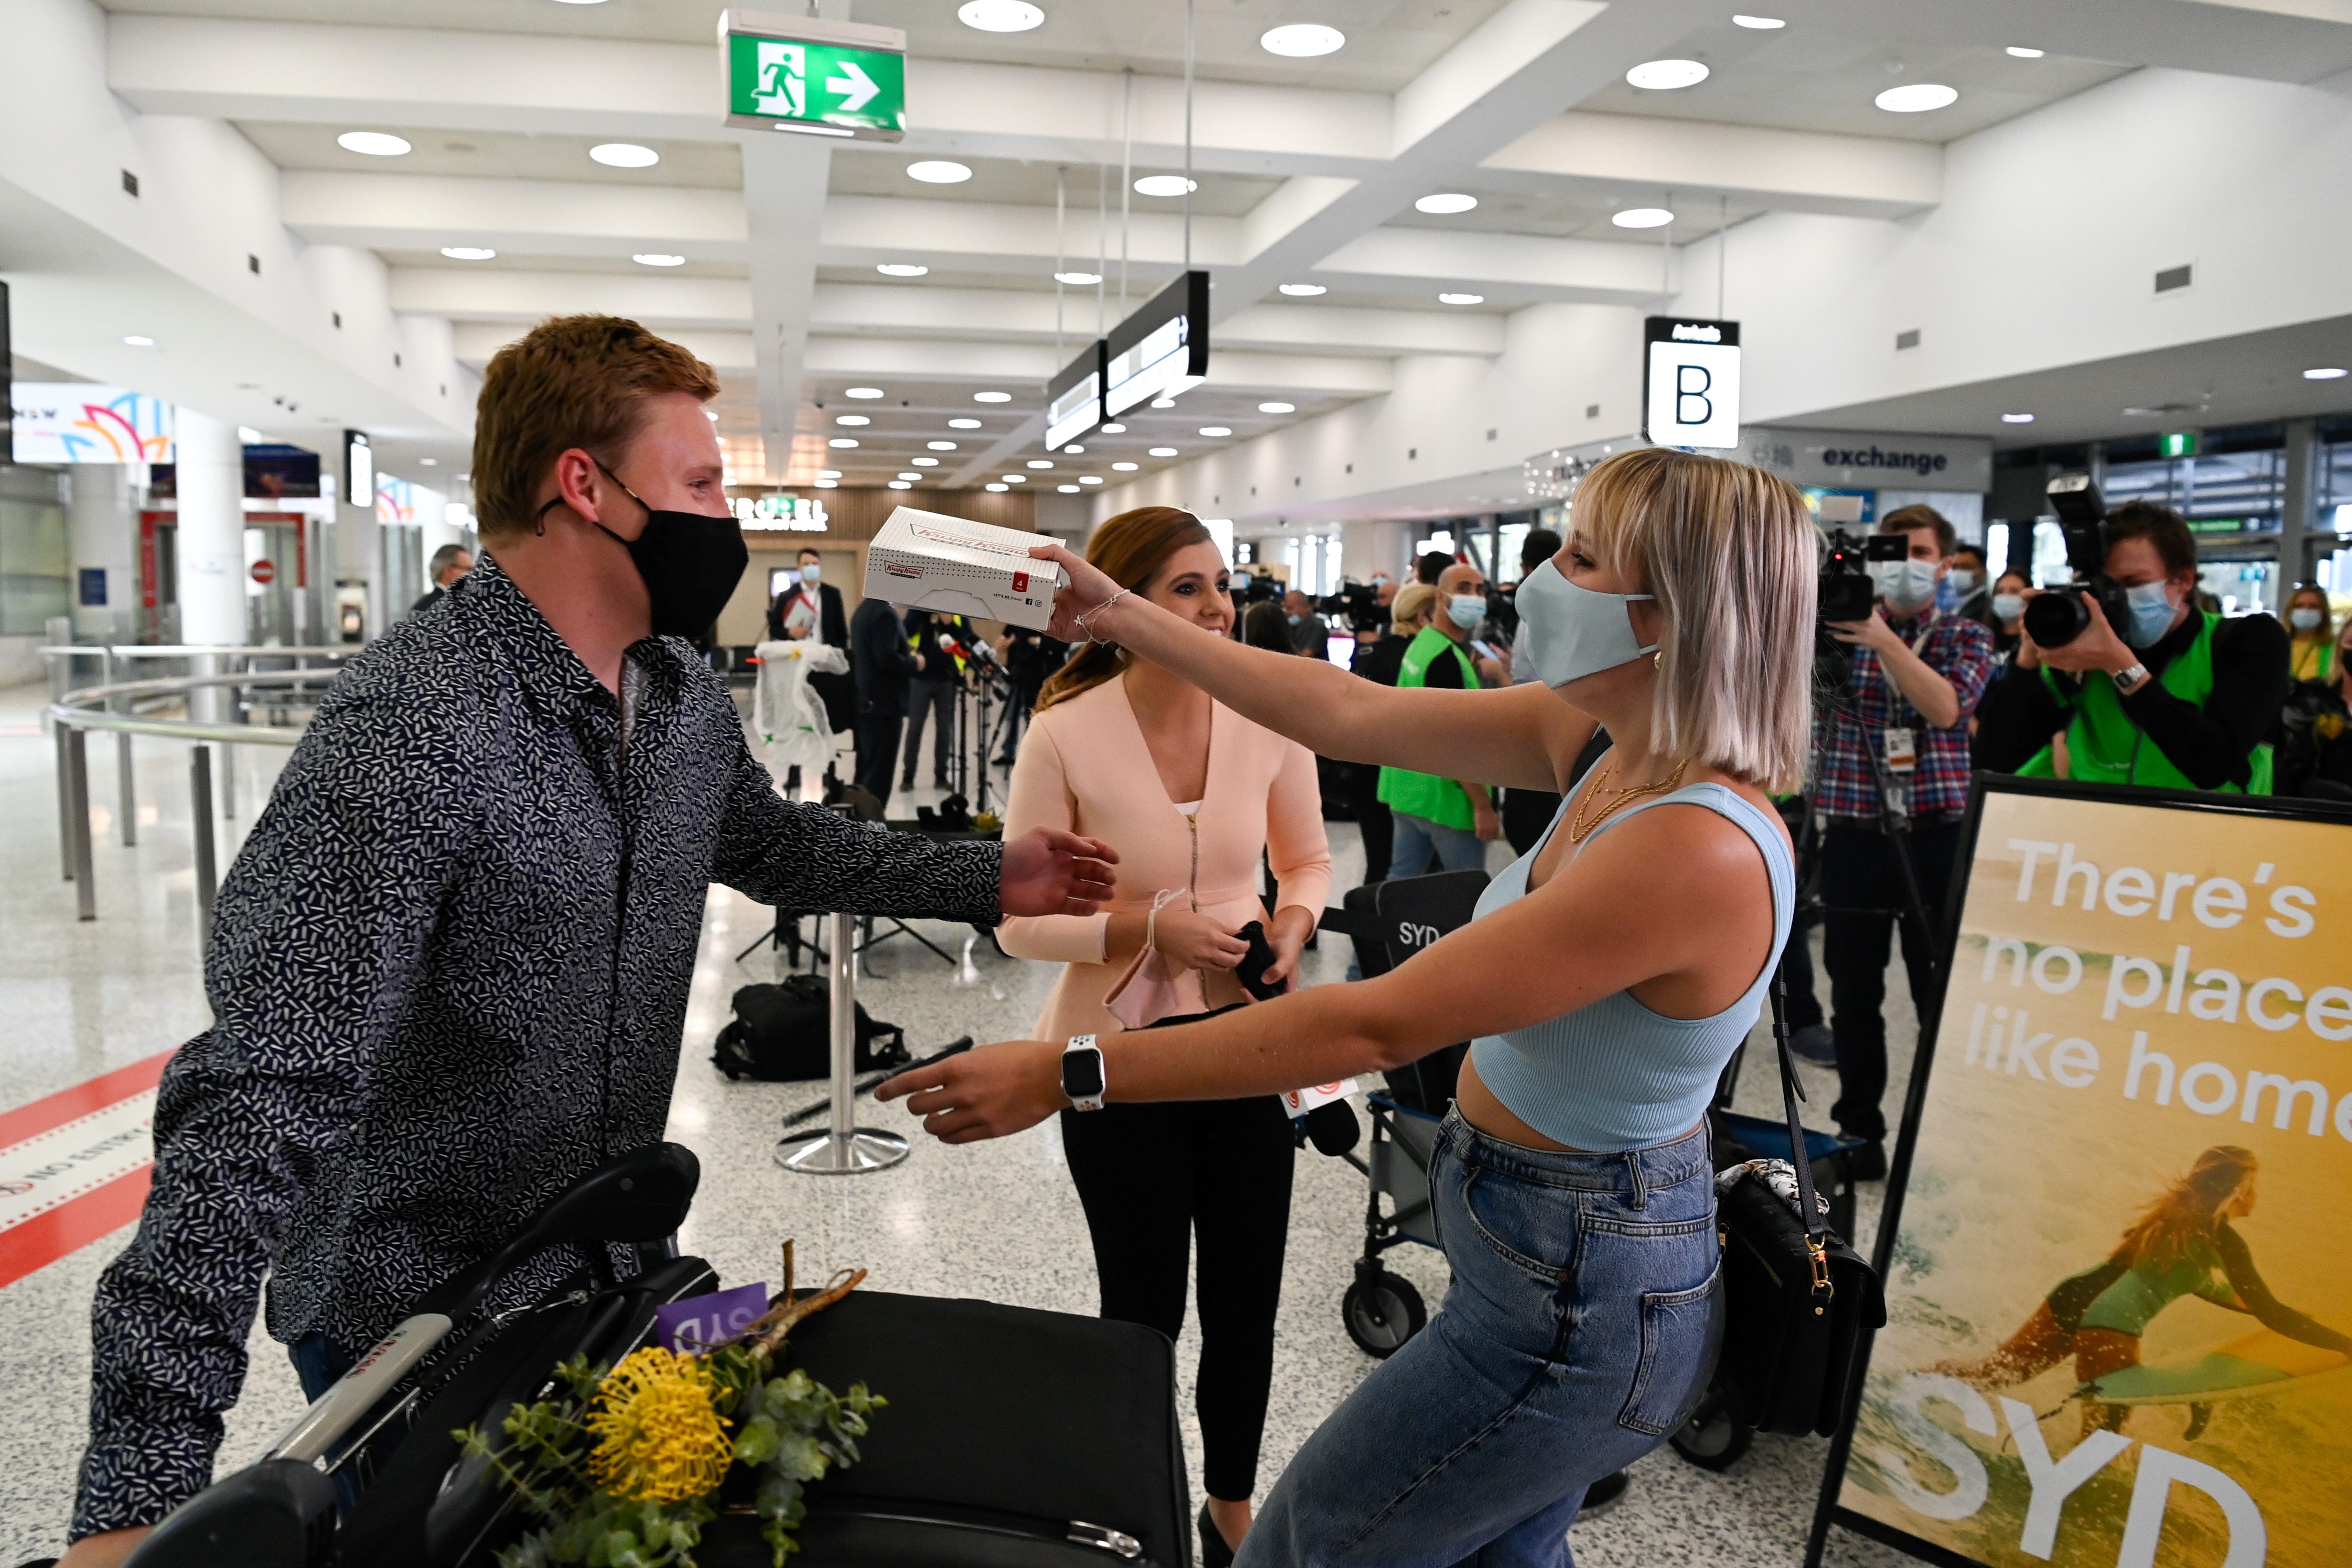 Australia reopens international borders for first time in pandemic